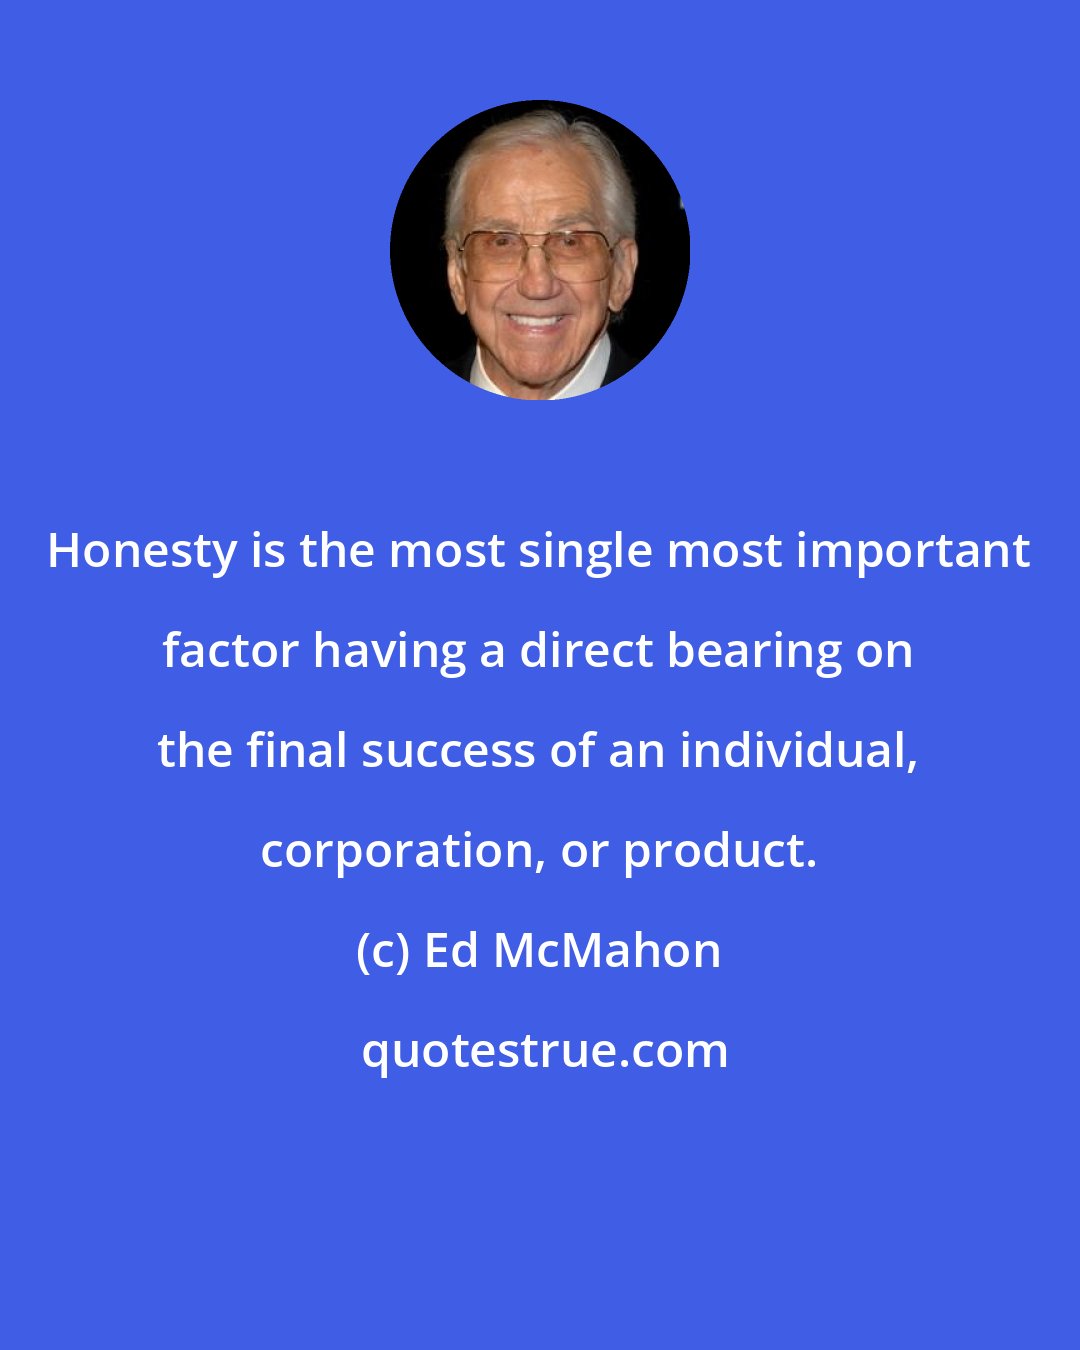 Ed McMahon: Honesty is the most single most important factor having a direct bearing on the final success of an individual, corporation, or product.